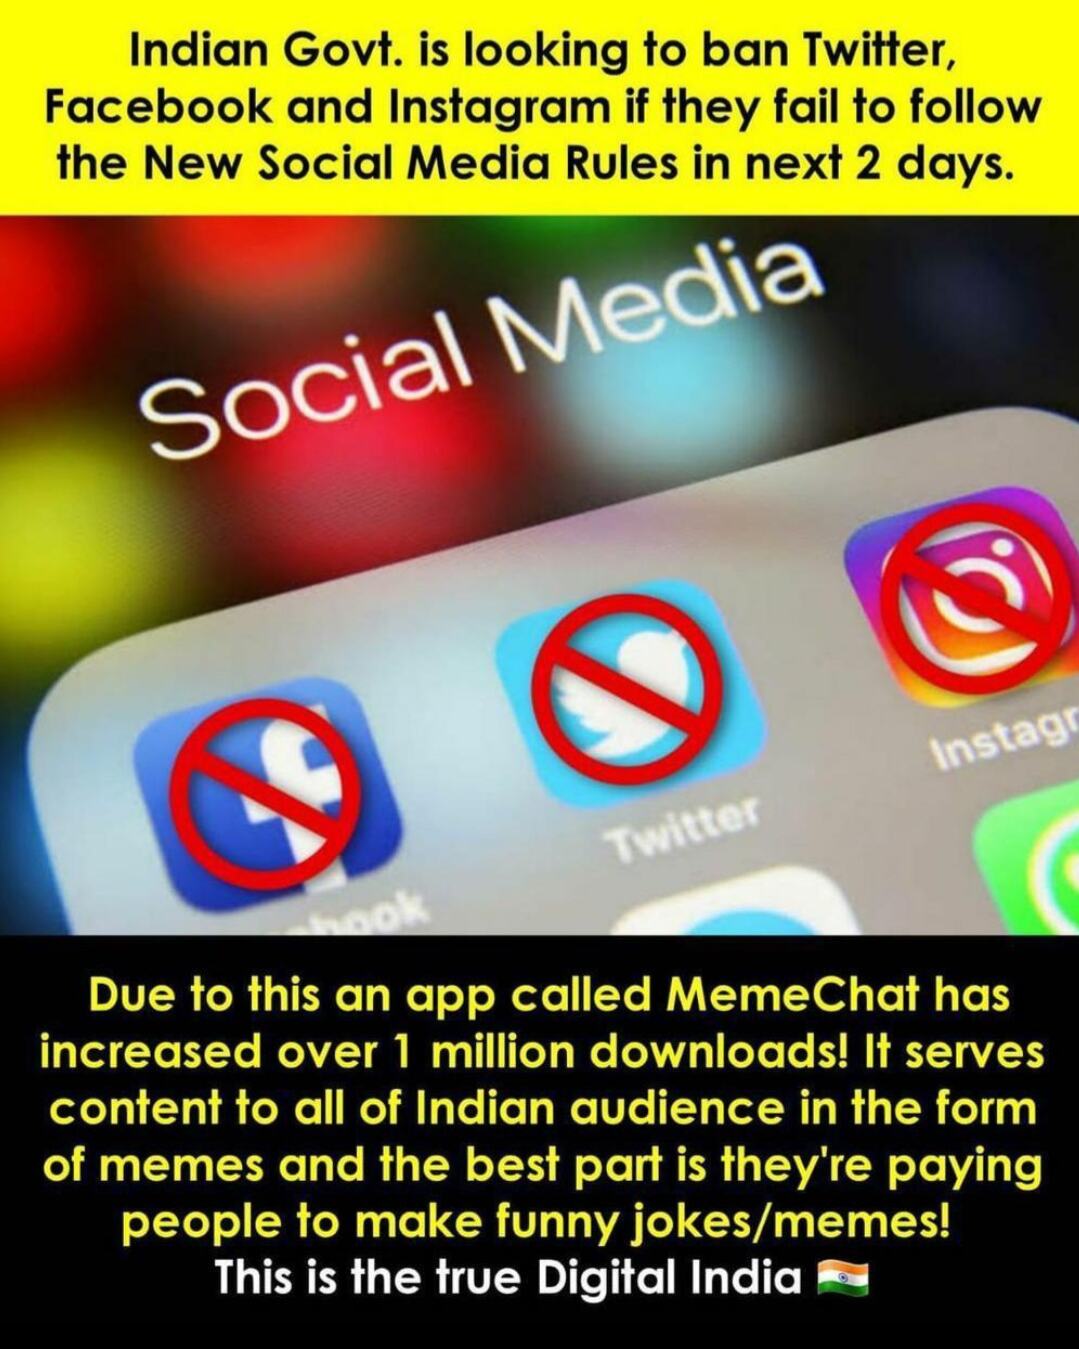 Viral claims about Centre's plan to ban social media Apps are MISLEADING